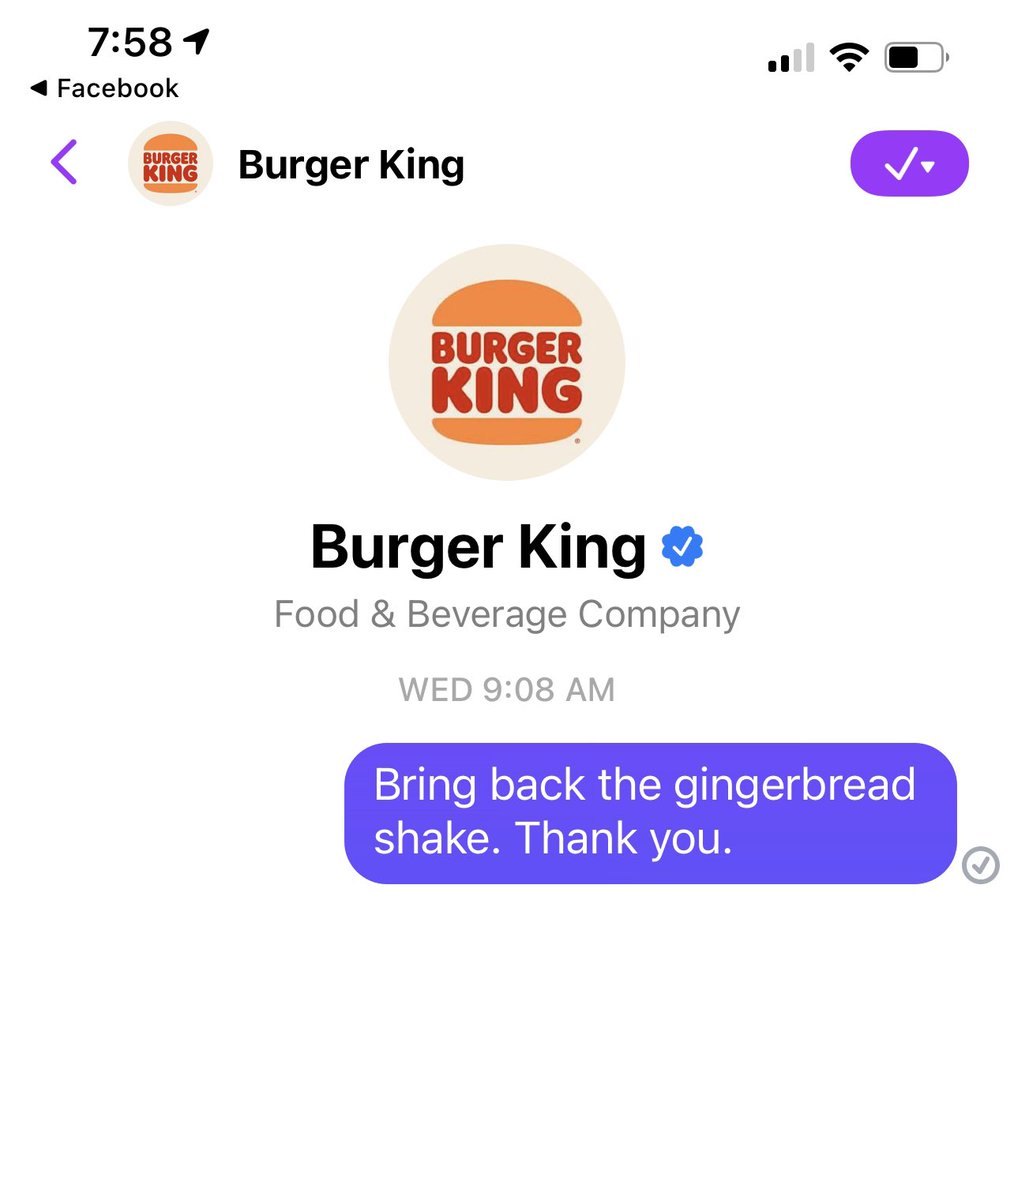 Day 2. I’ve also sent  @BurgerKing a FB message. Please bring back the gingerbread shake. Thank you